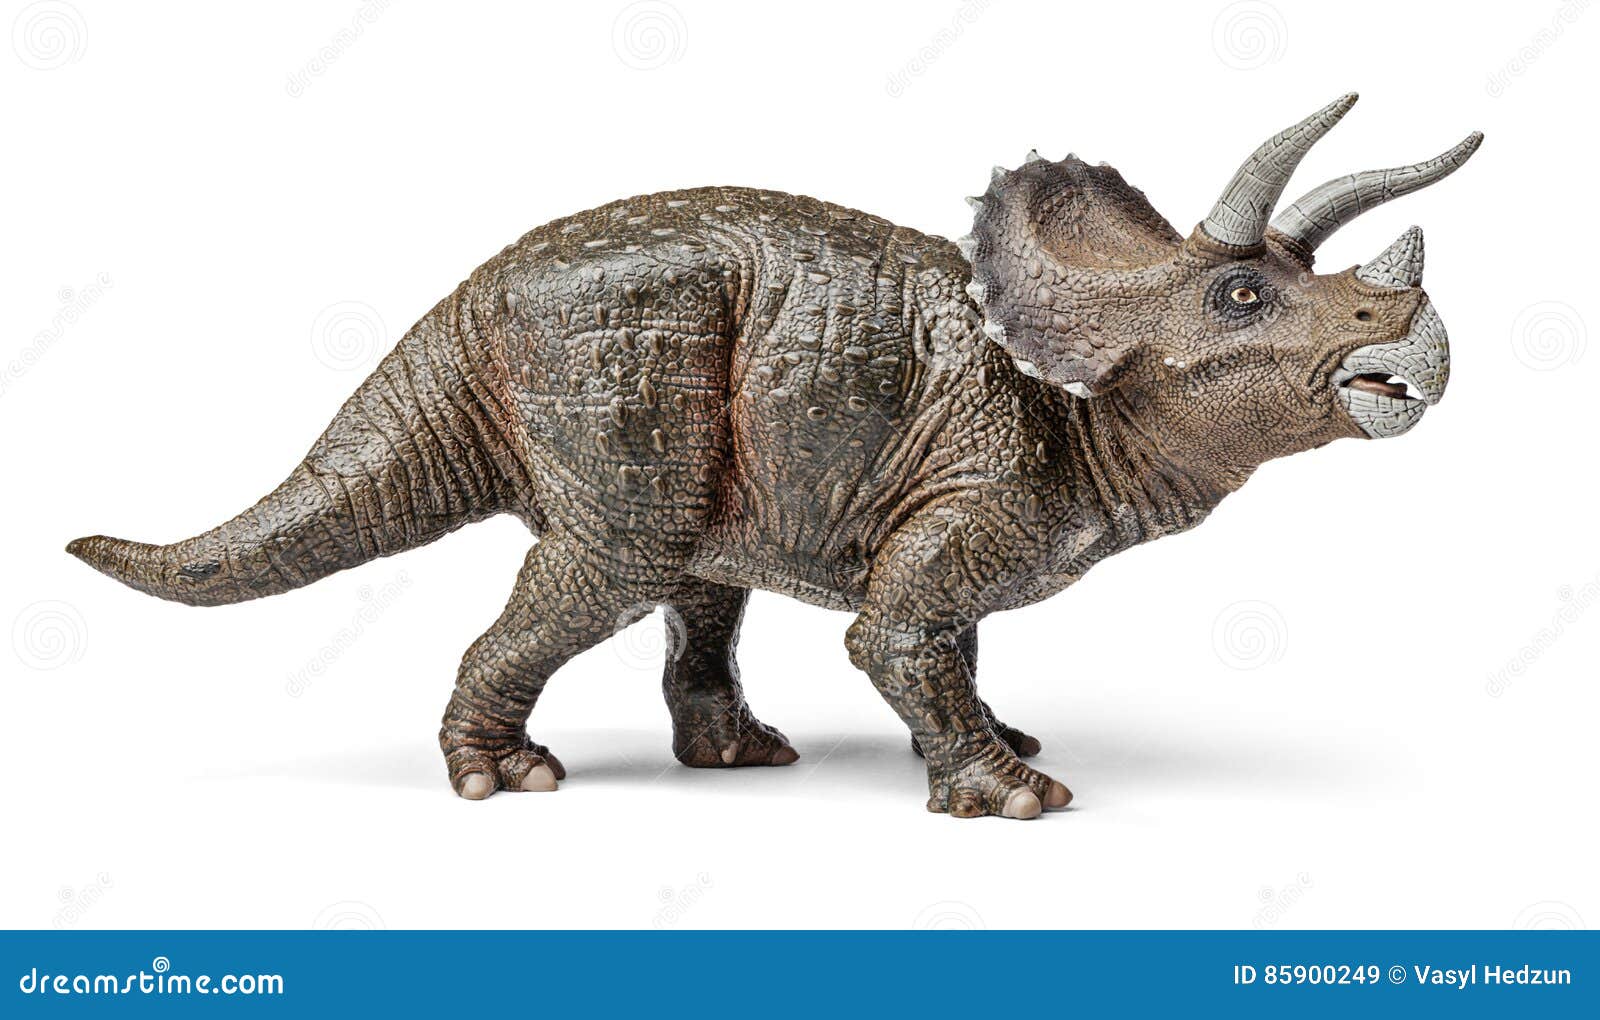 triceratops dinosaurs toy with clipping path.